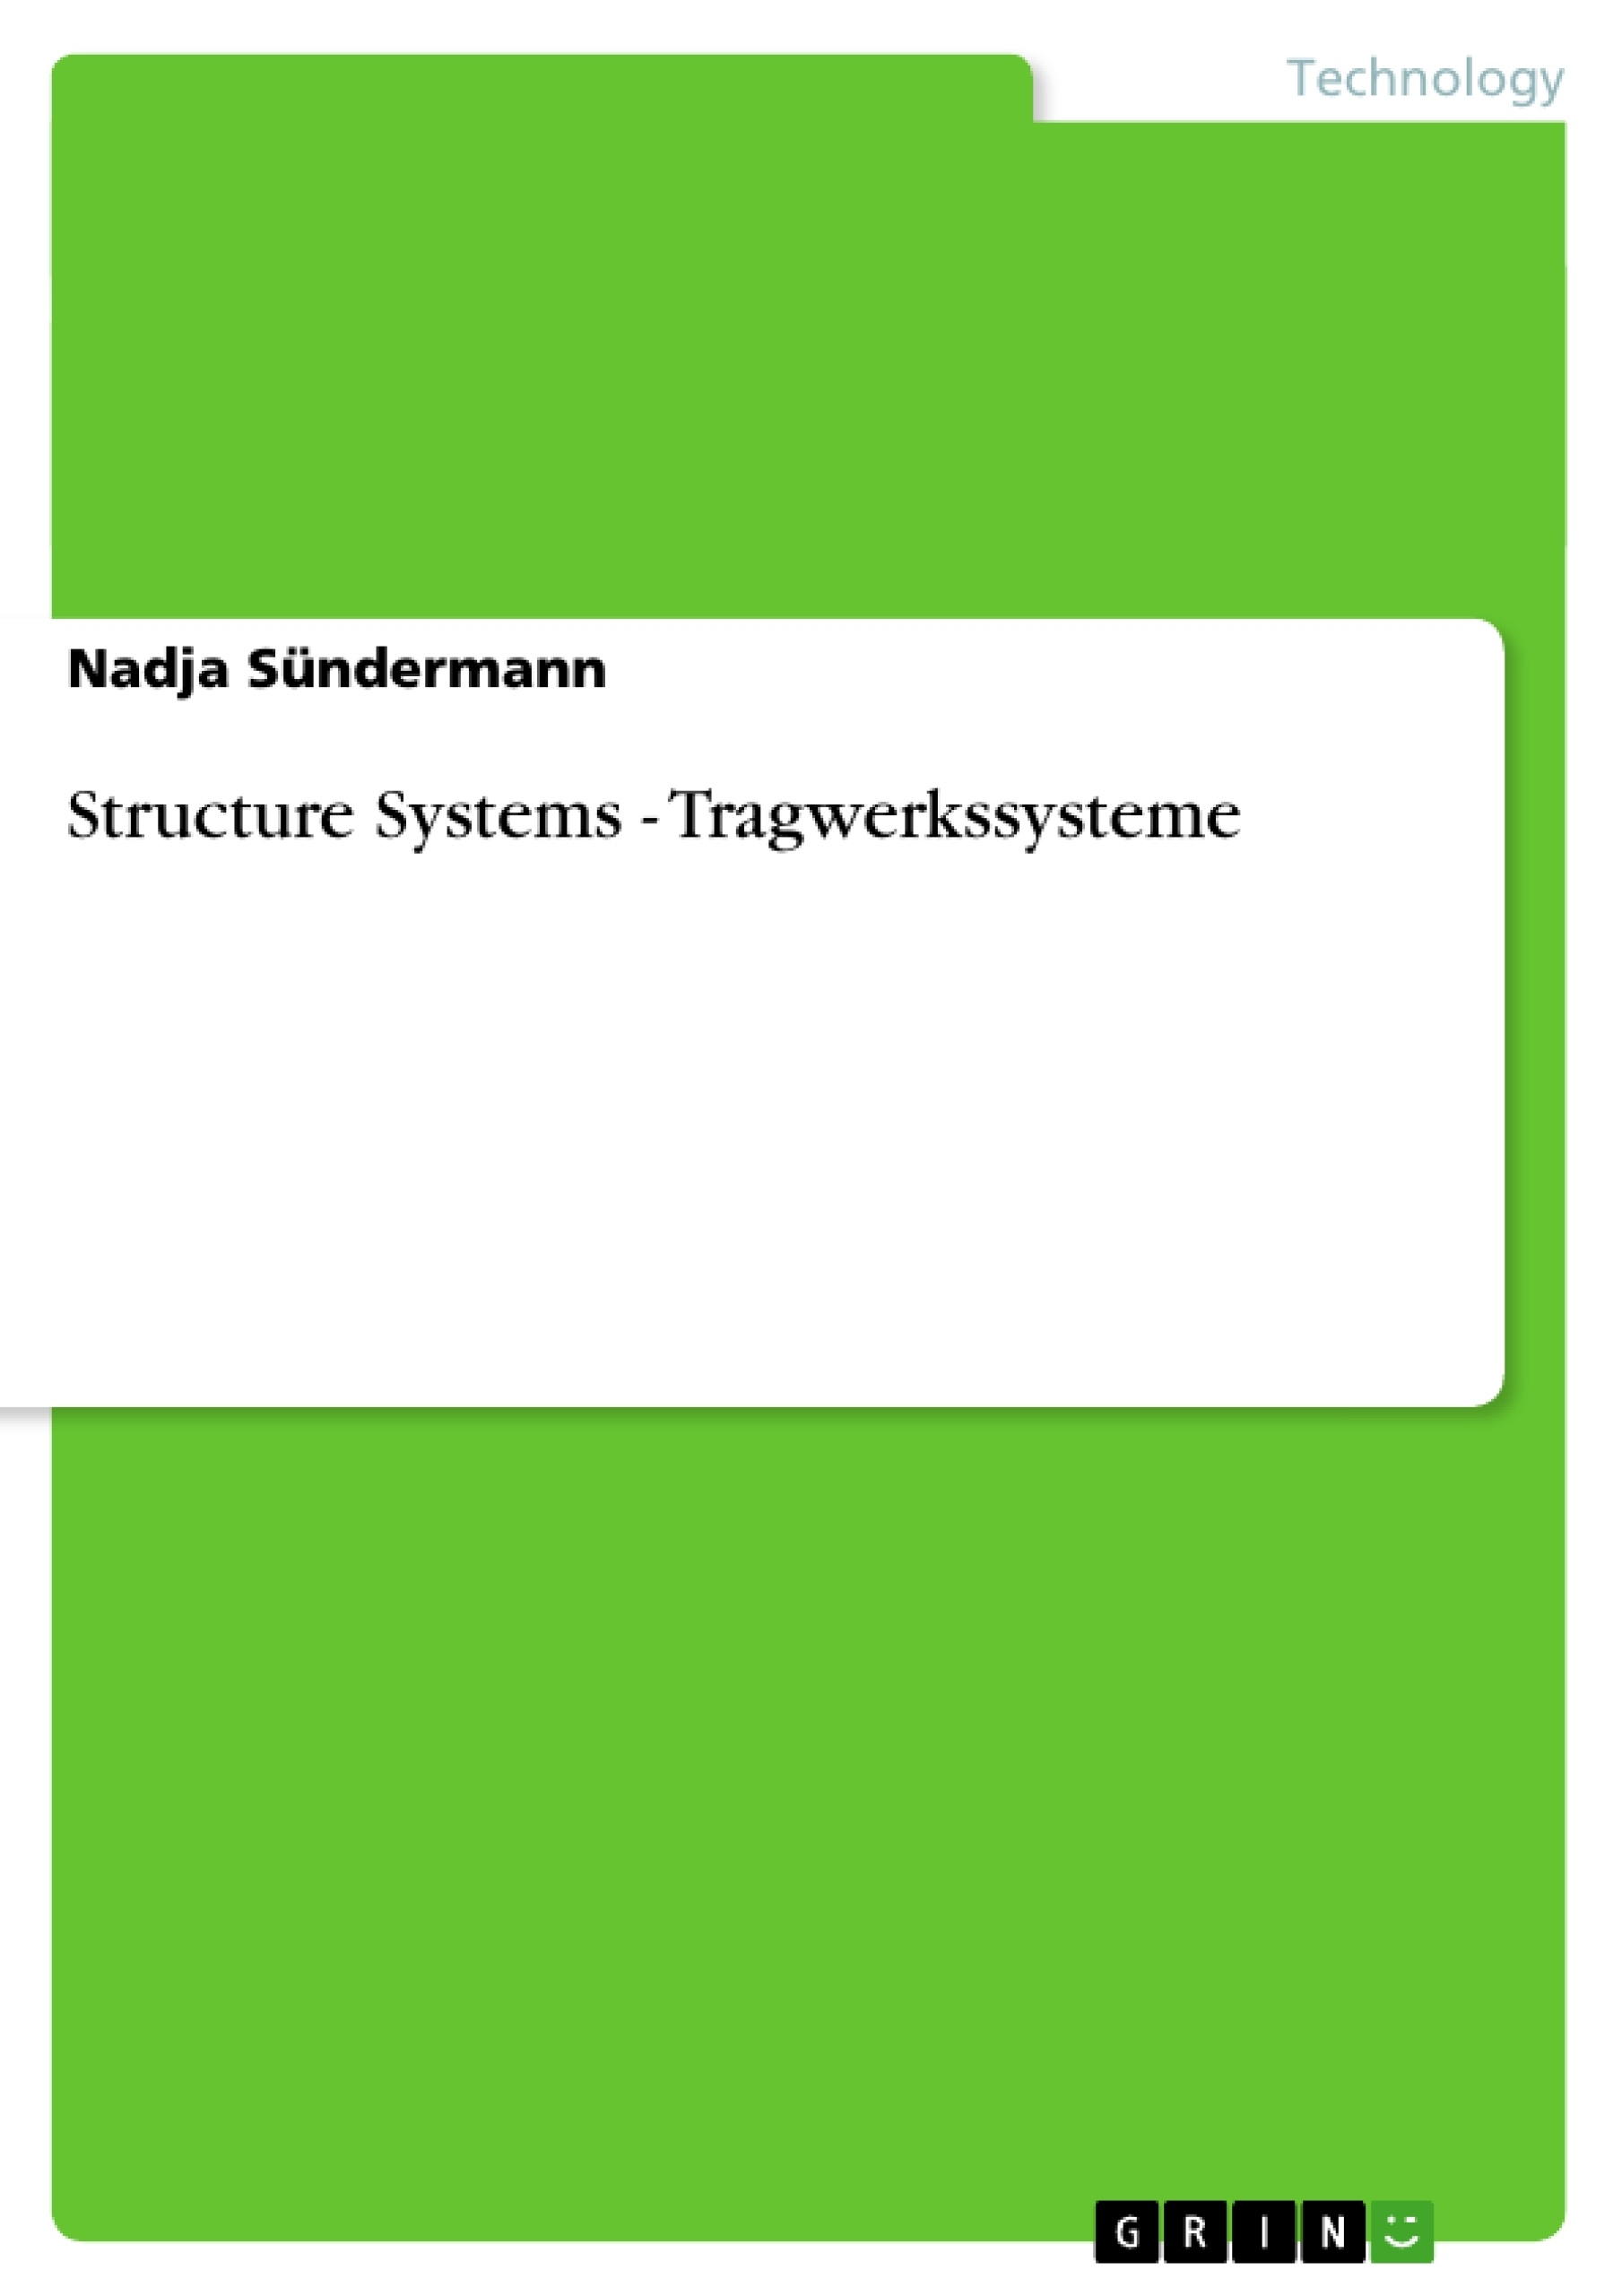 Titre: Structure Systems - Tragwerkssysteme